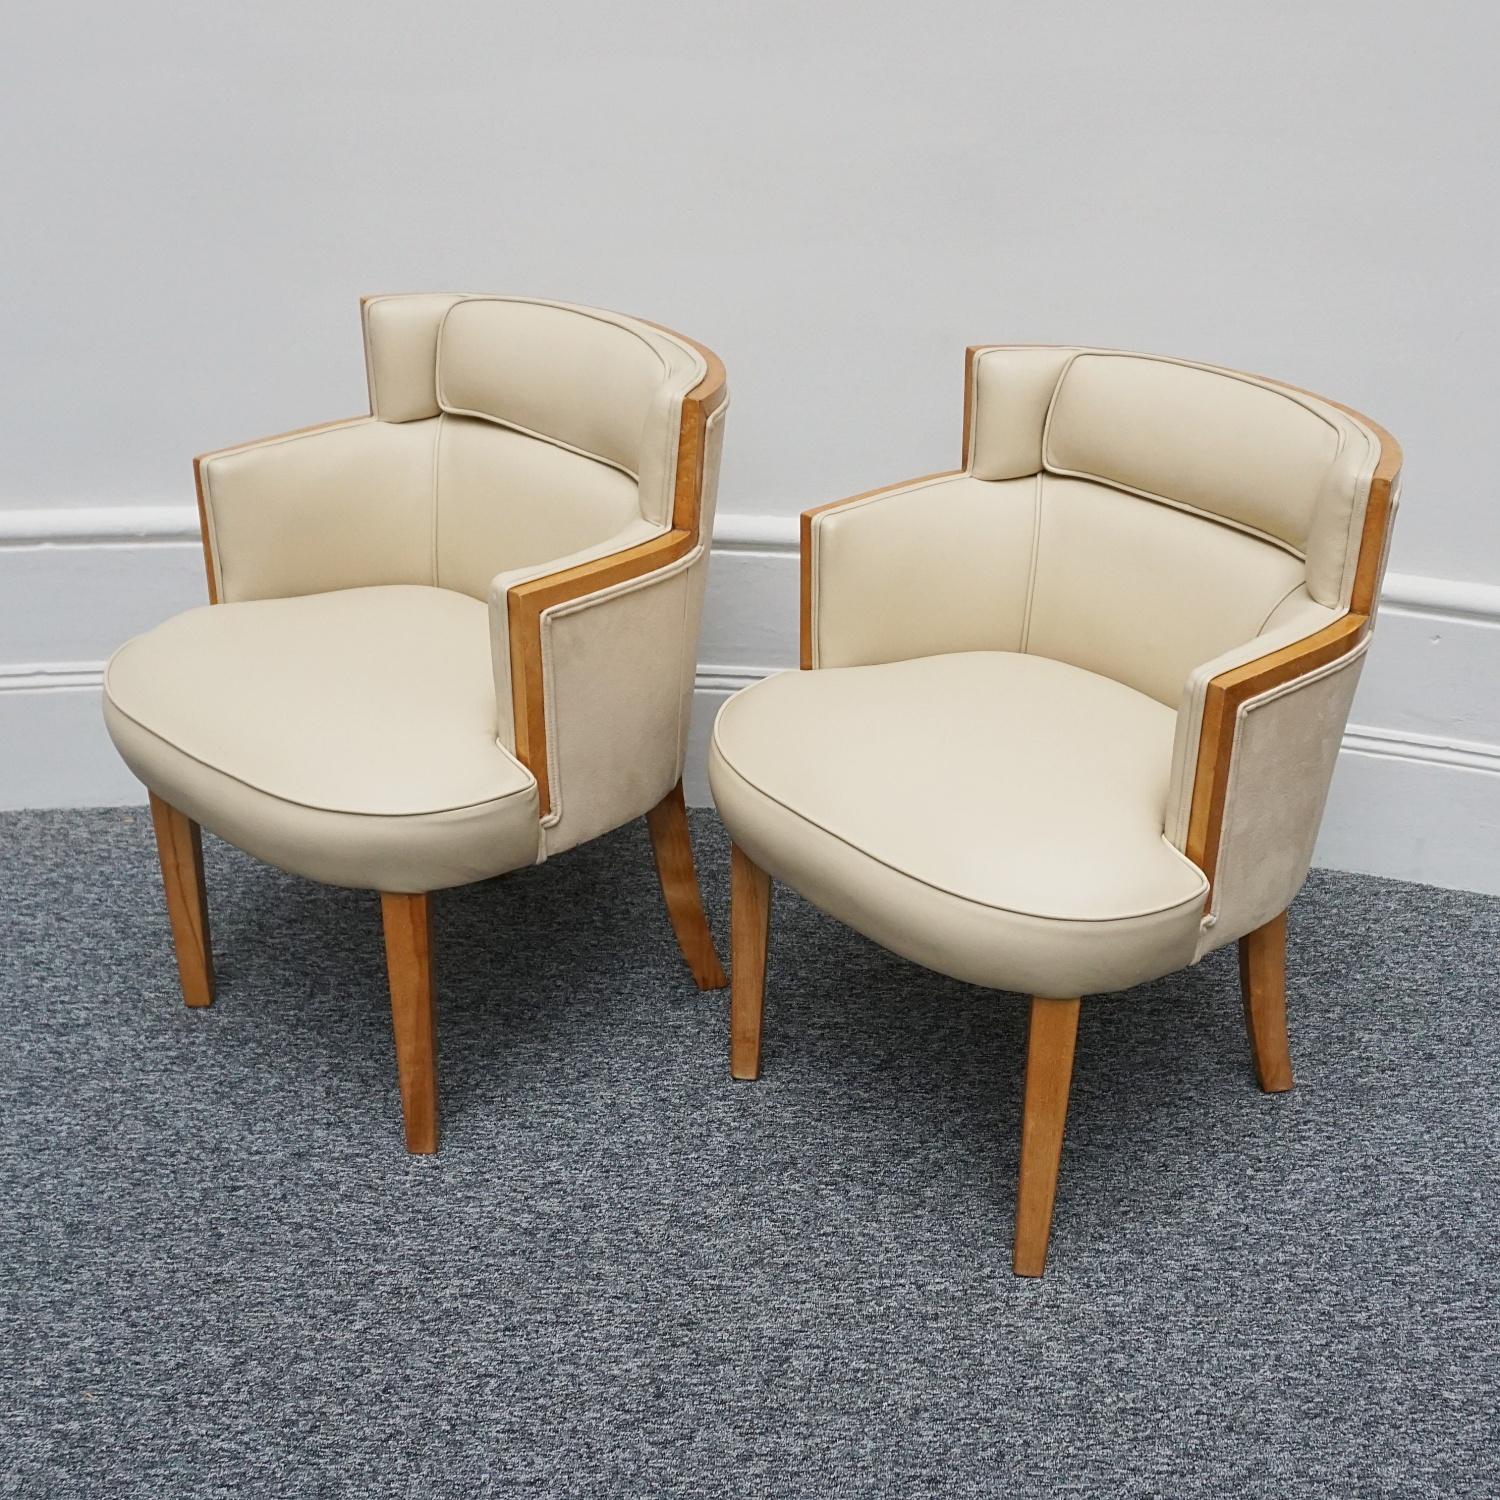 Mid-20th Century An Original Pair of Art Deco Bankers Chairs English Circa 1935  For Sale